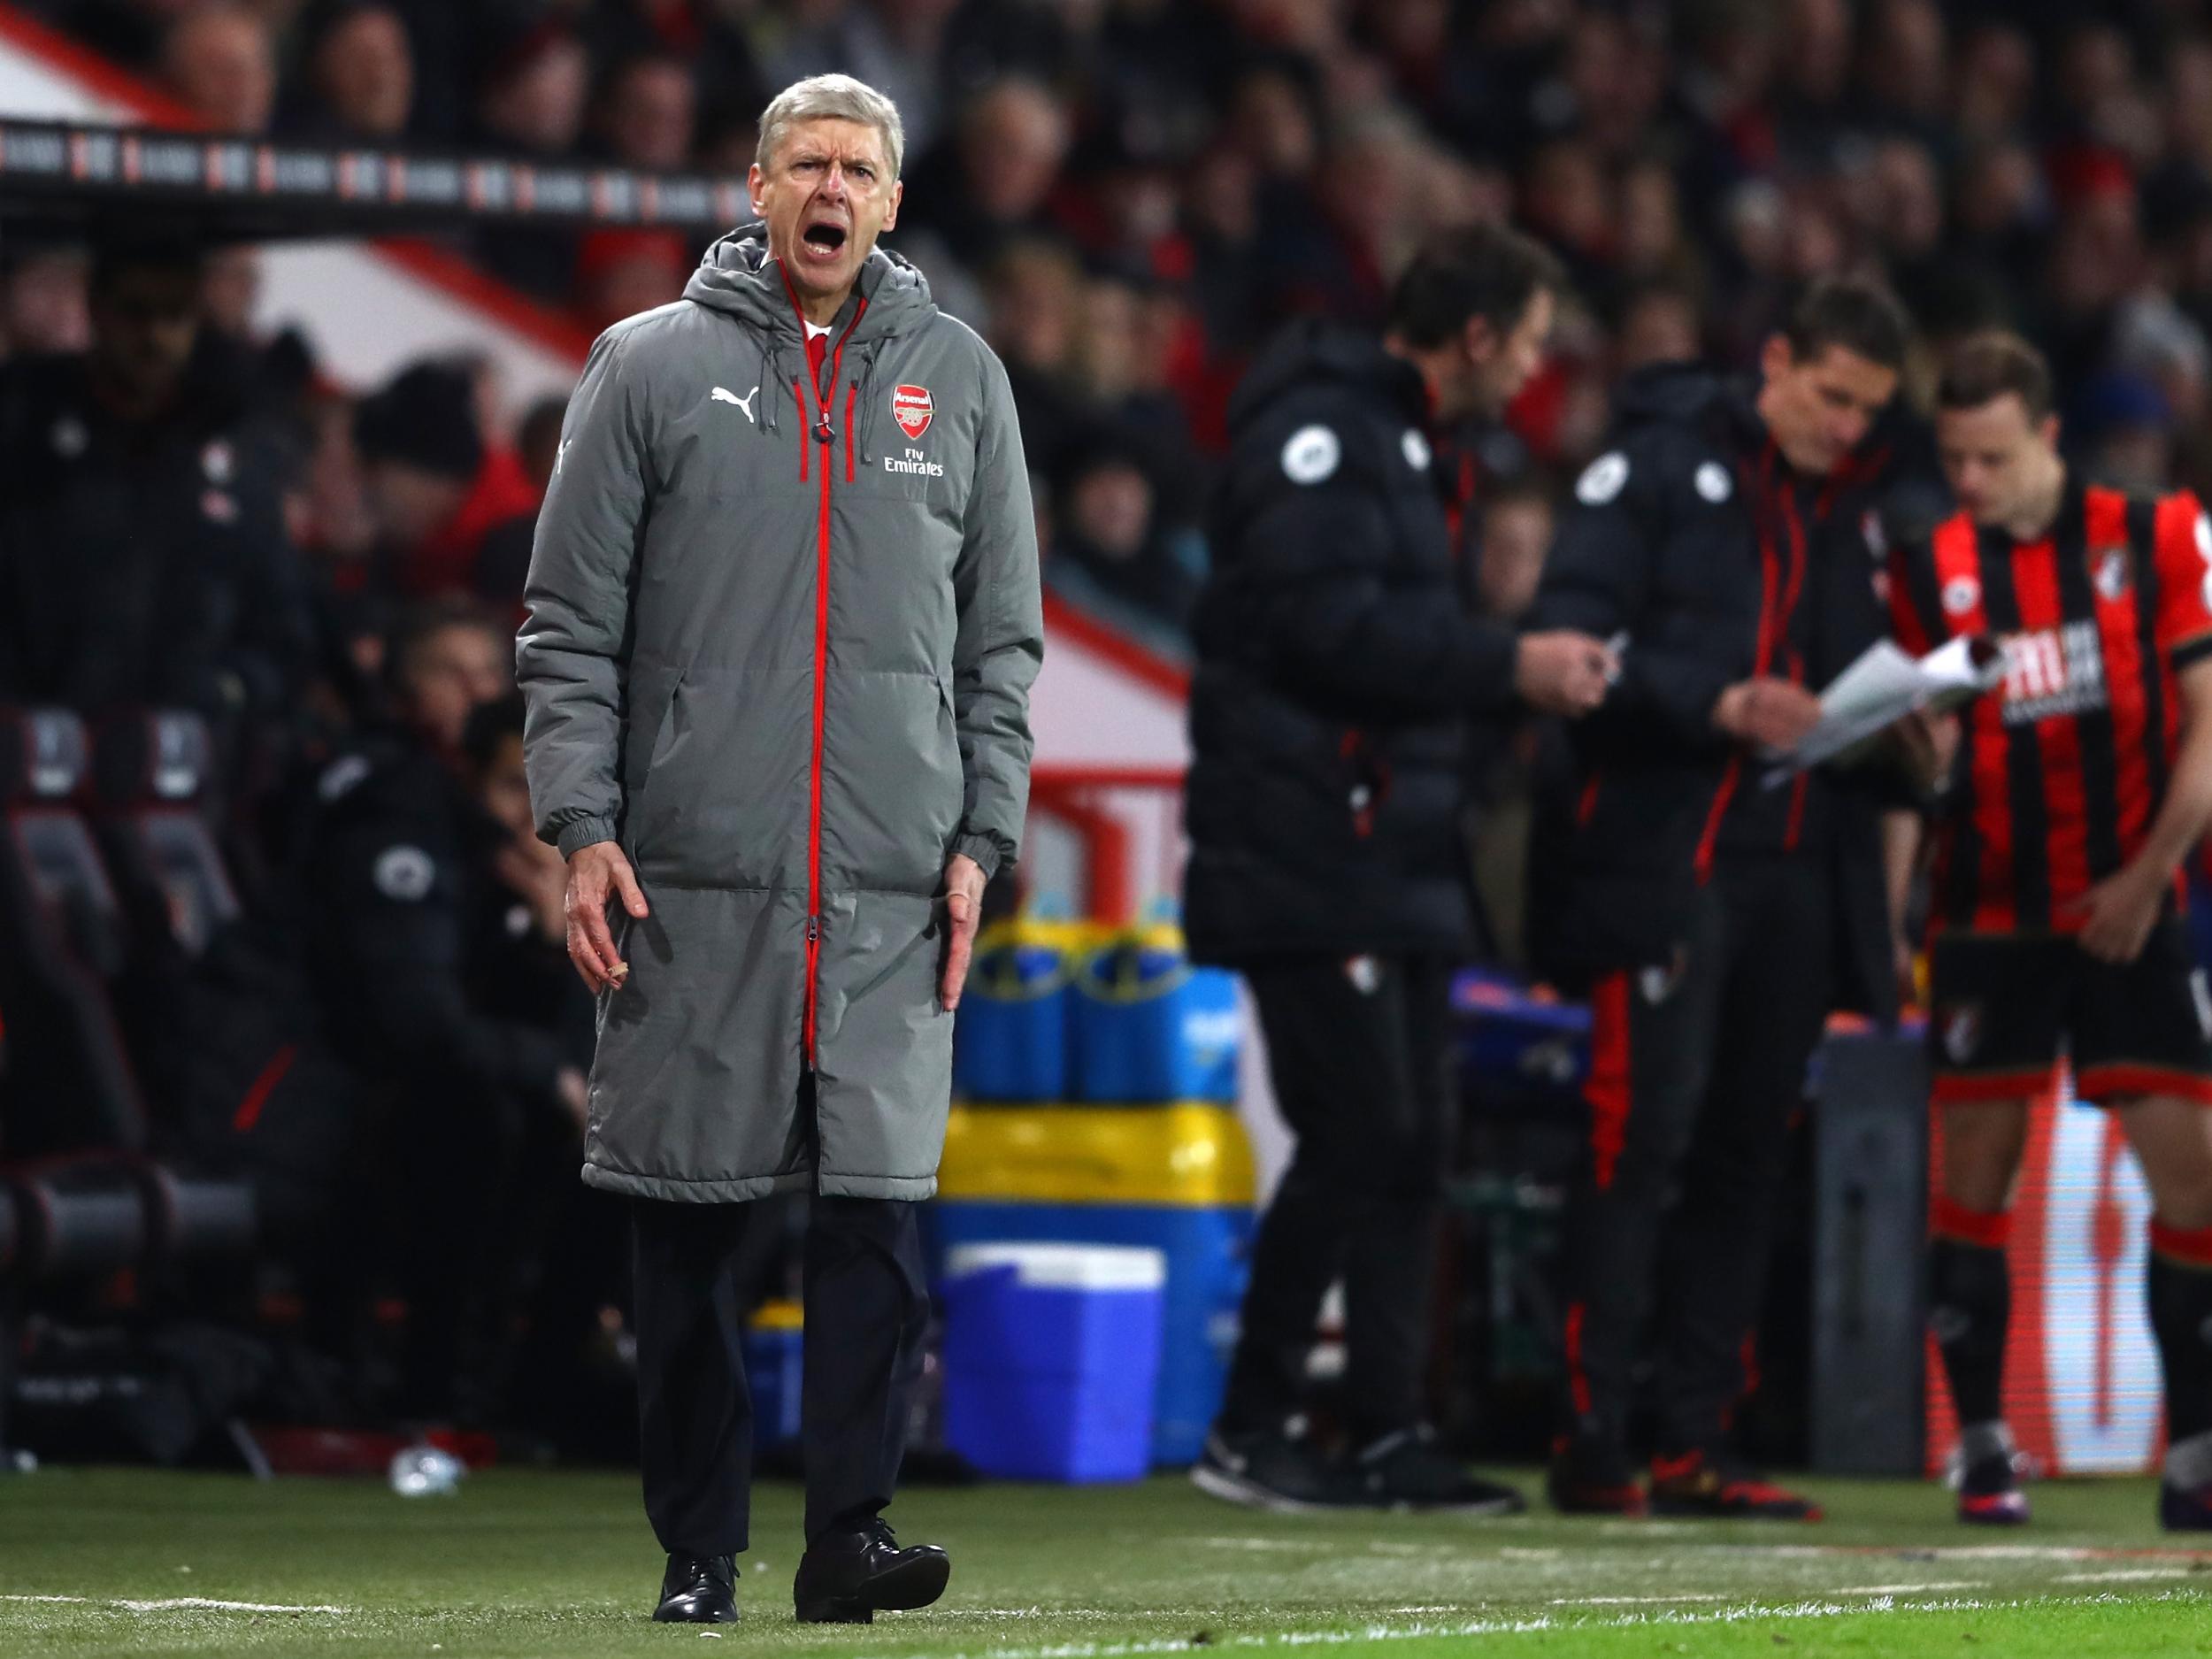 Wenger called Bournemouth's extra rest day unfair